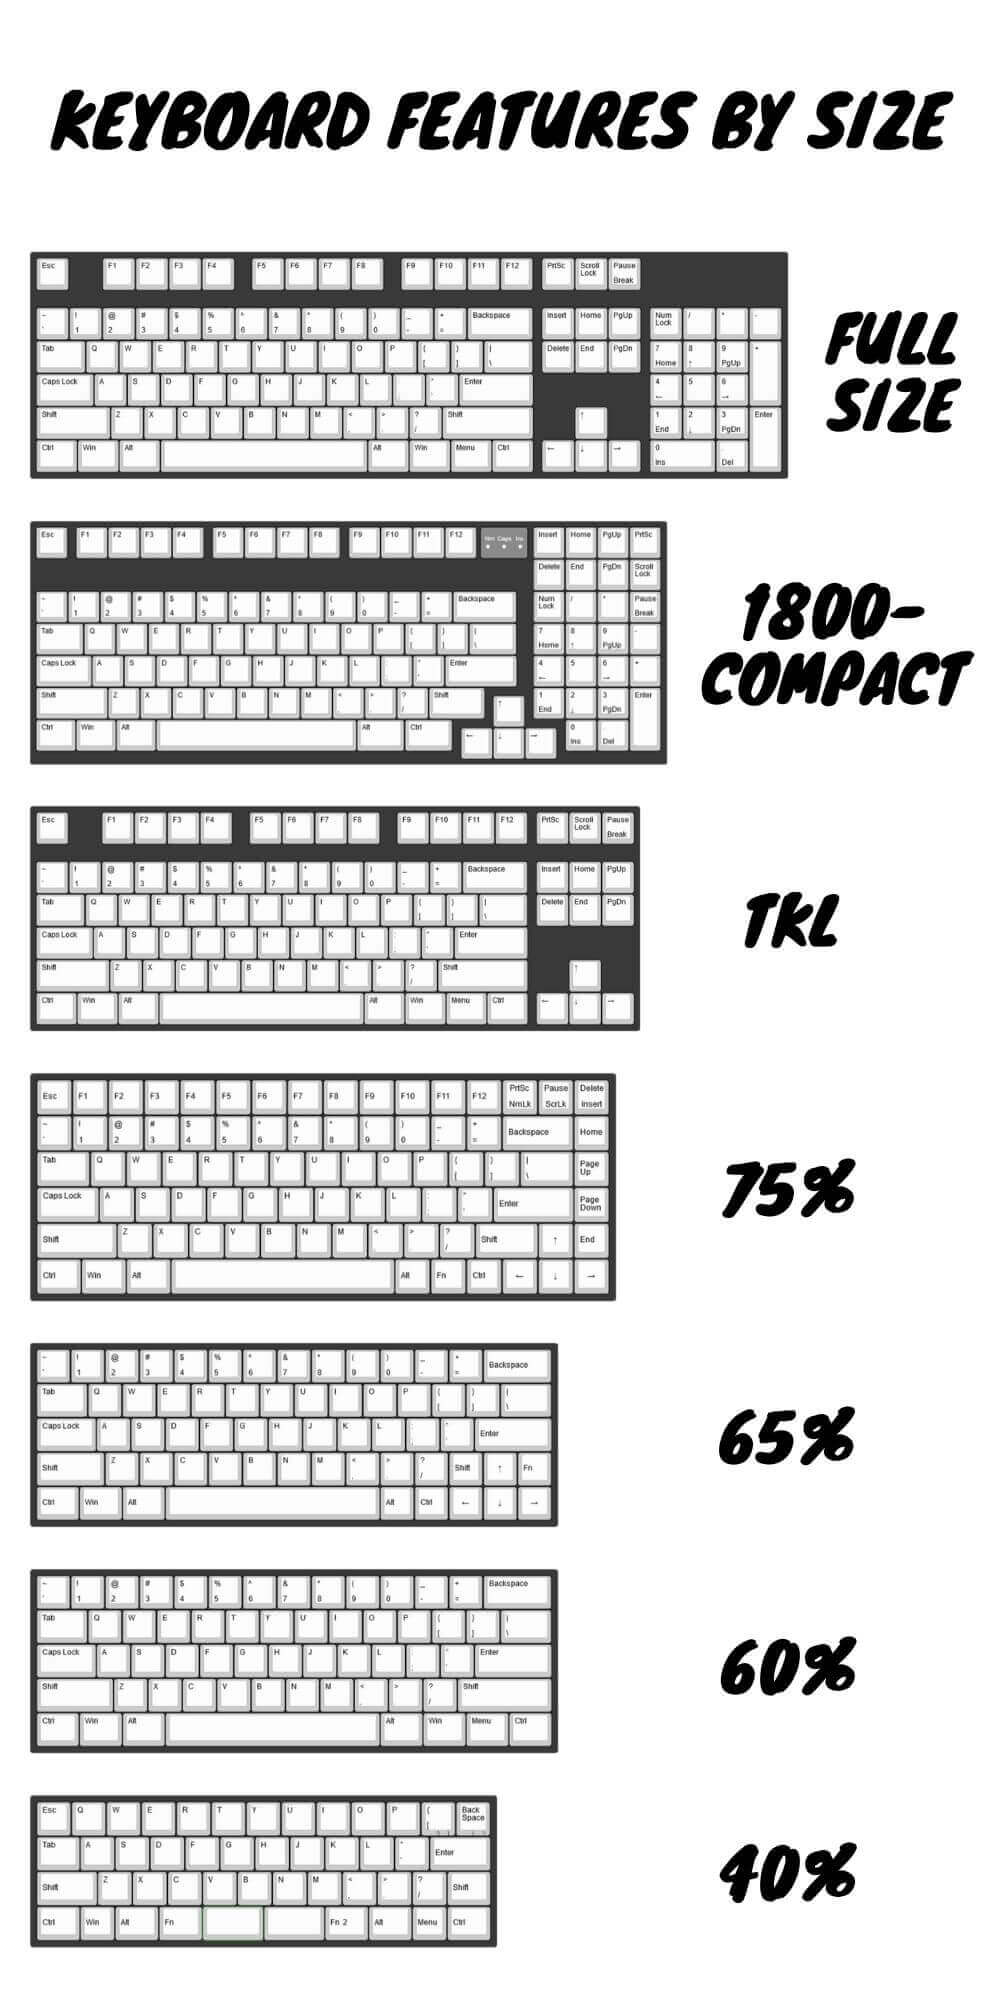 Keyboard features by size